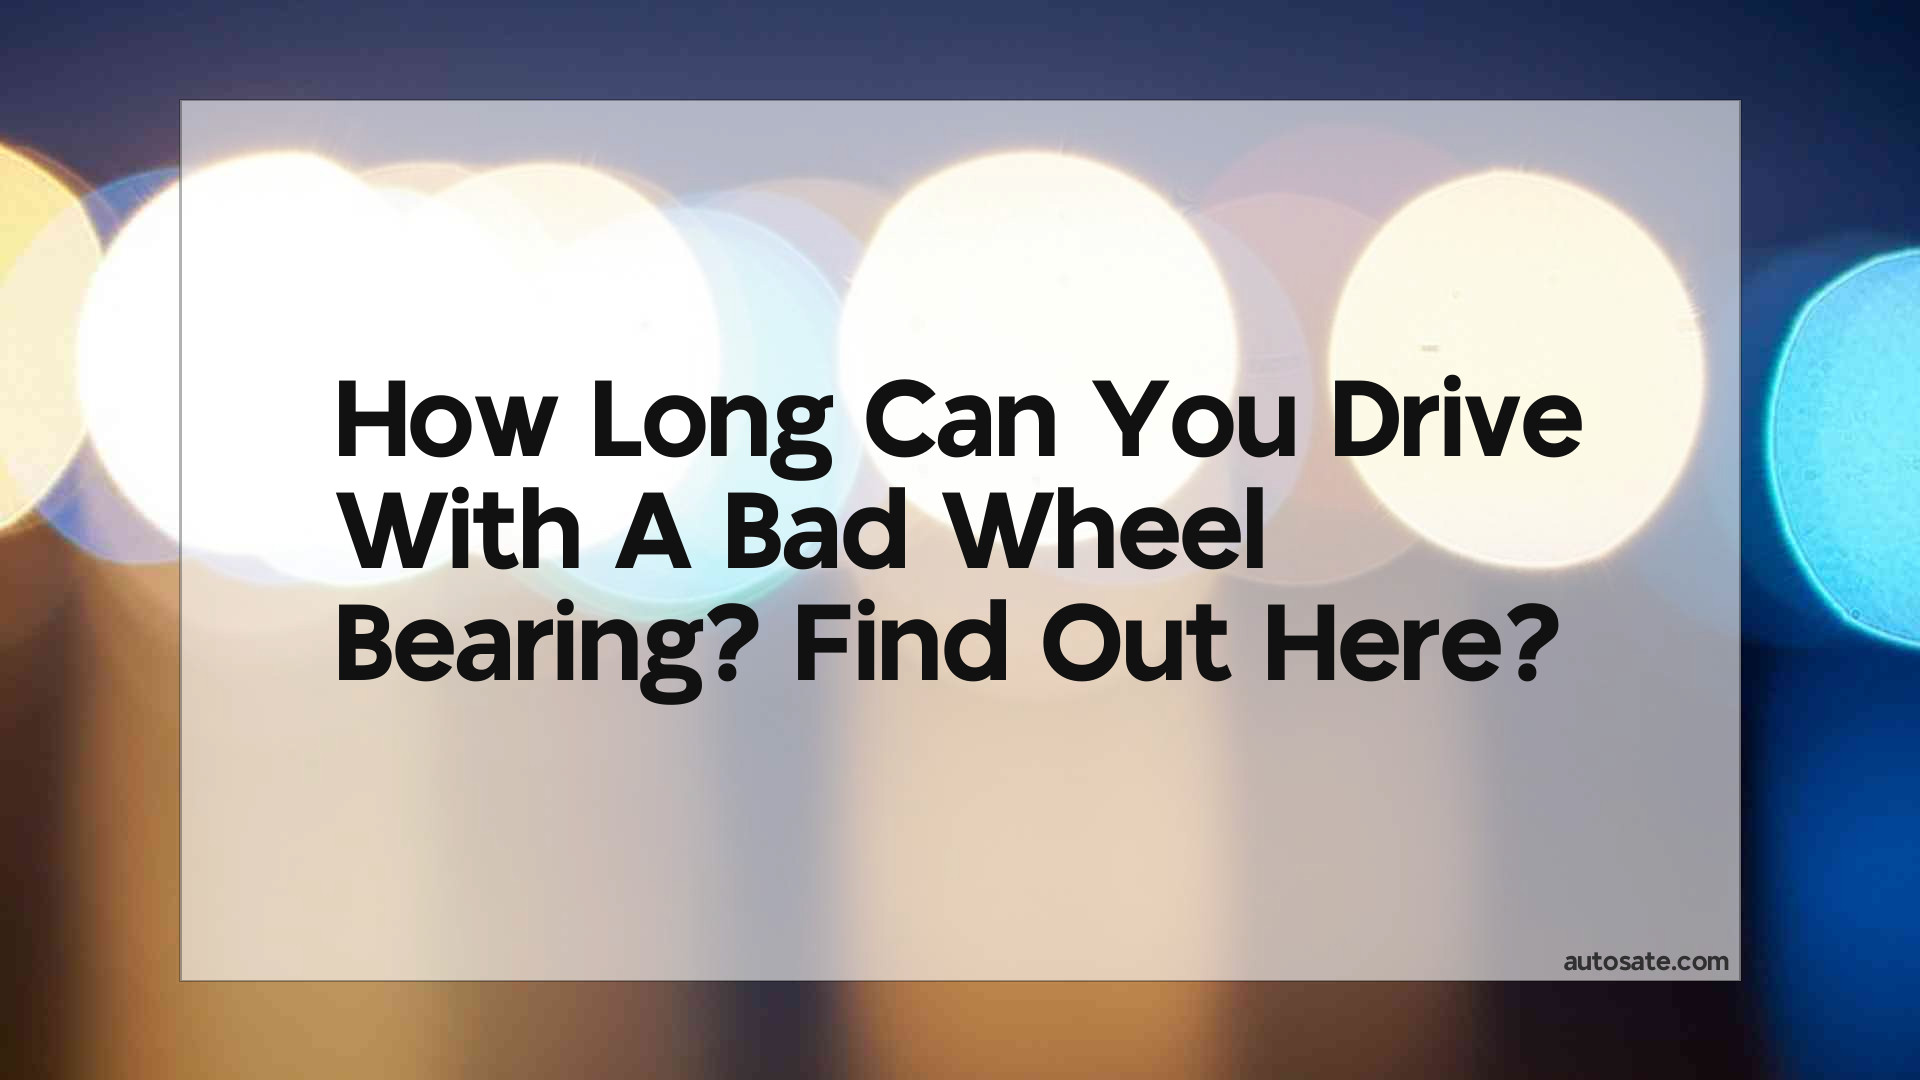 How Long Can You Drive With A Bad Wheel Bearing? Find Out Here